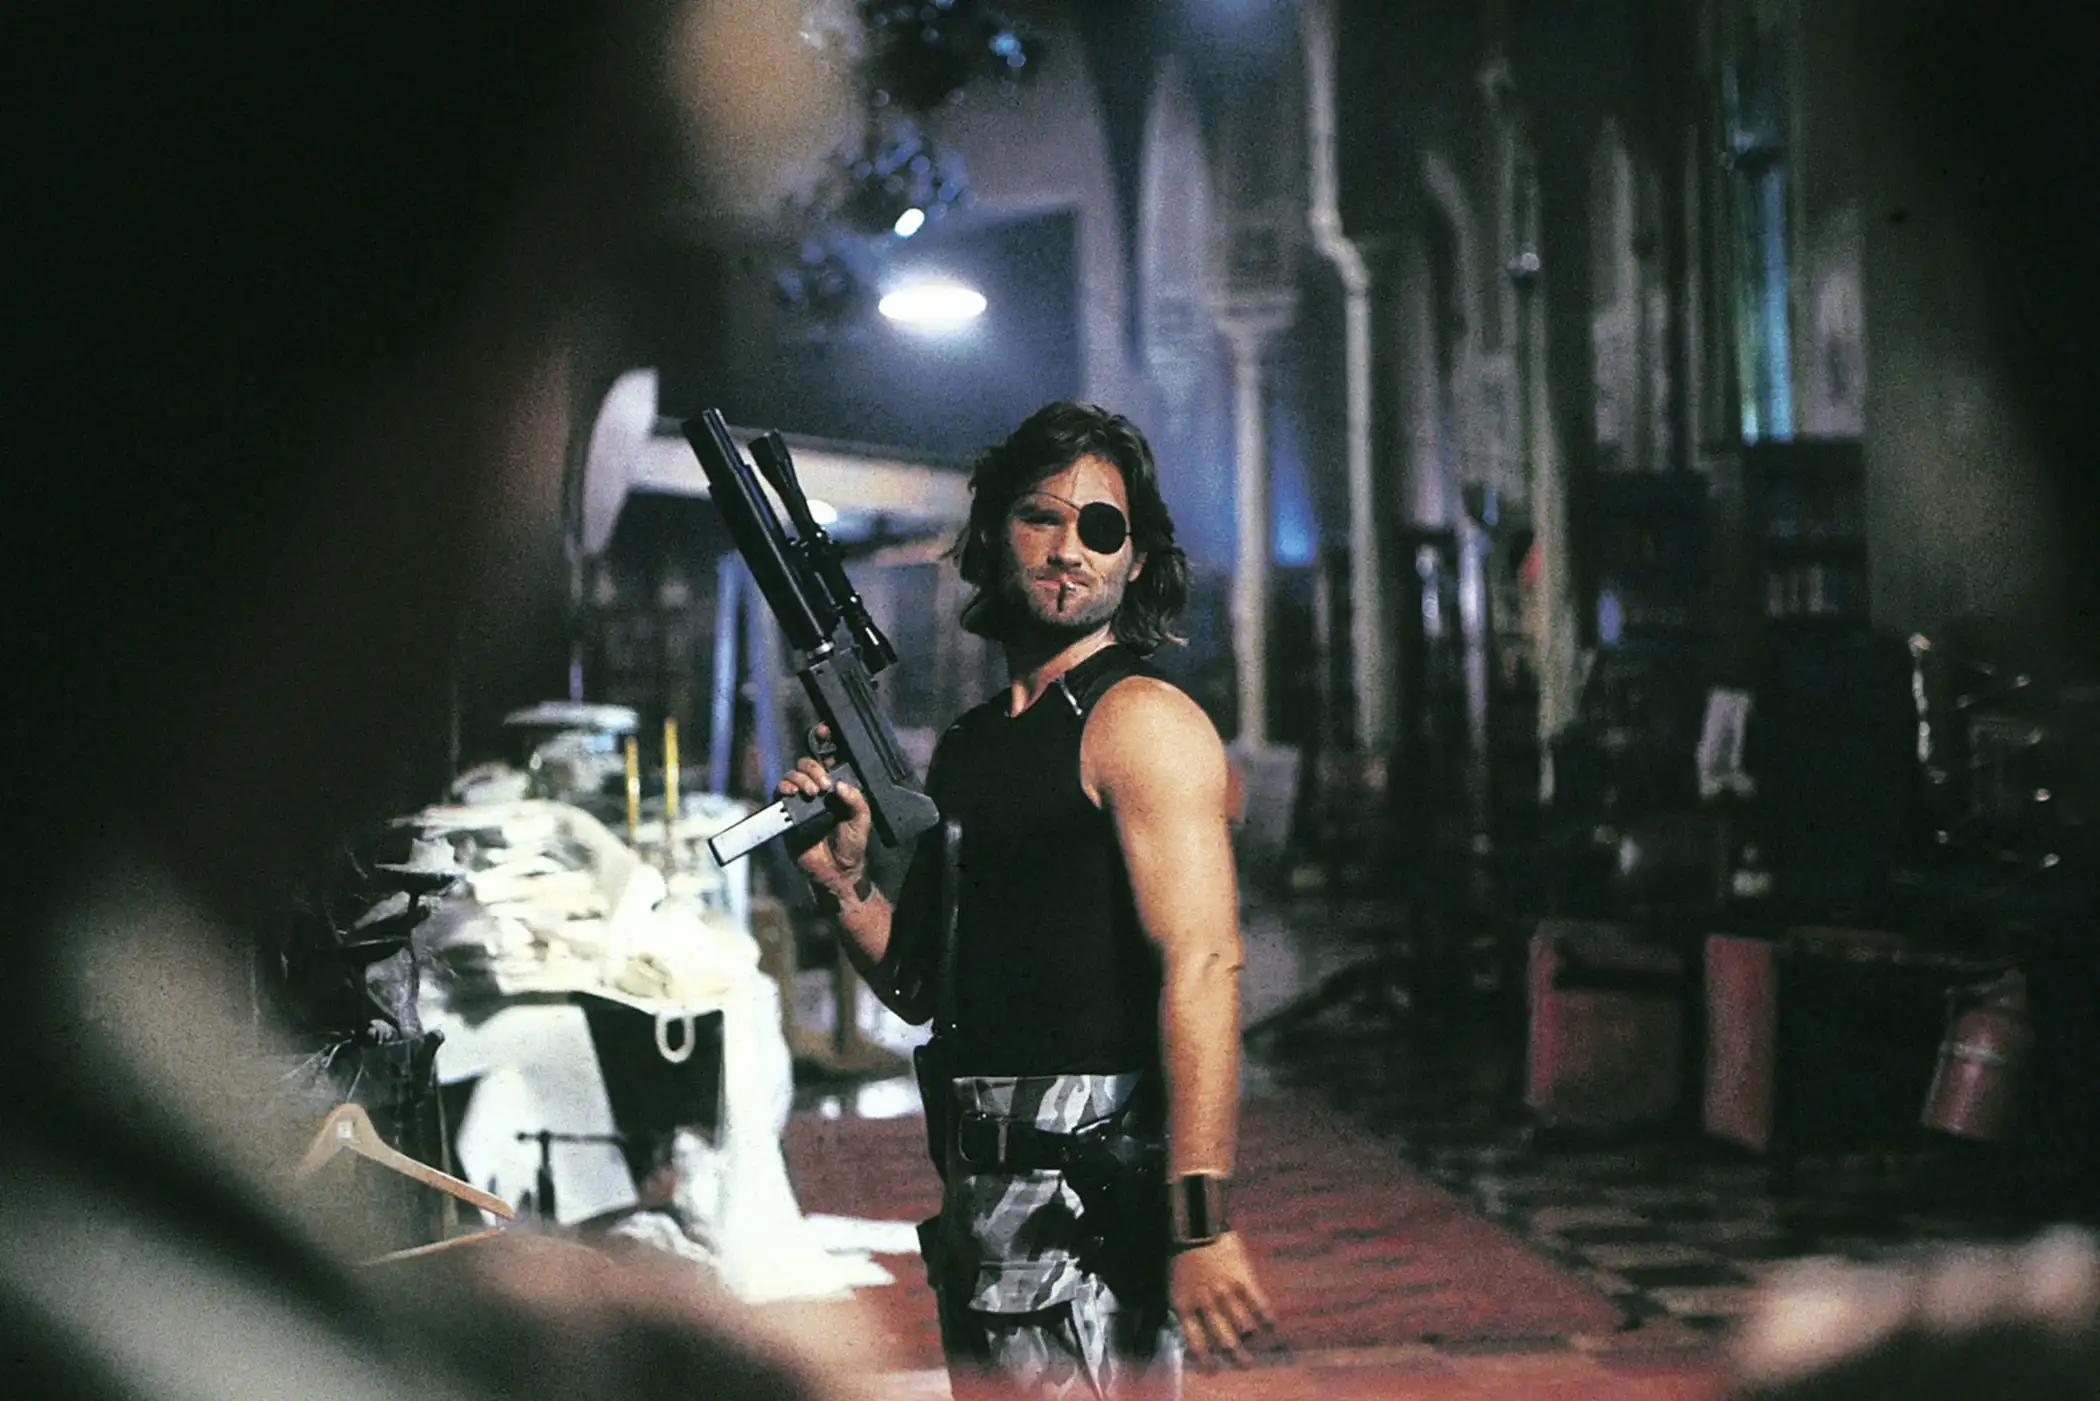 Escape from 70 s